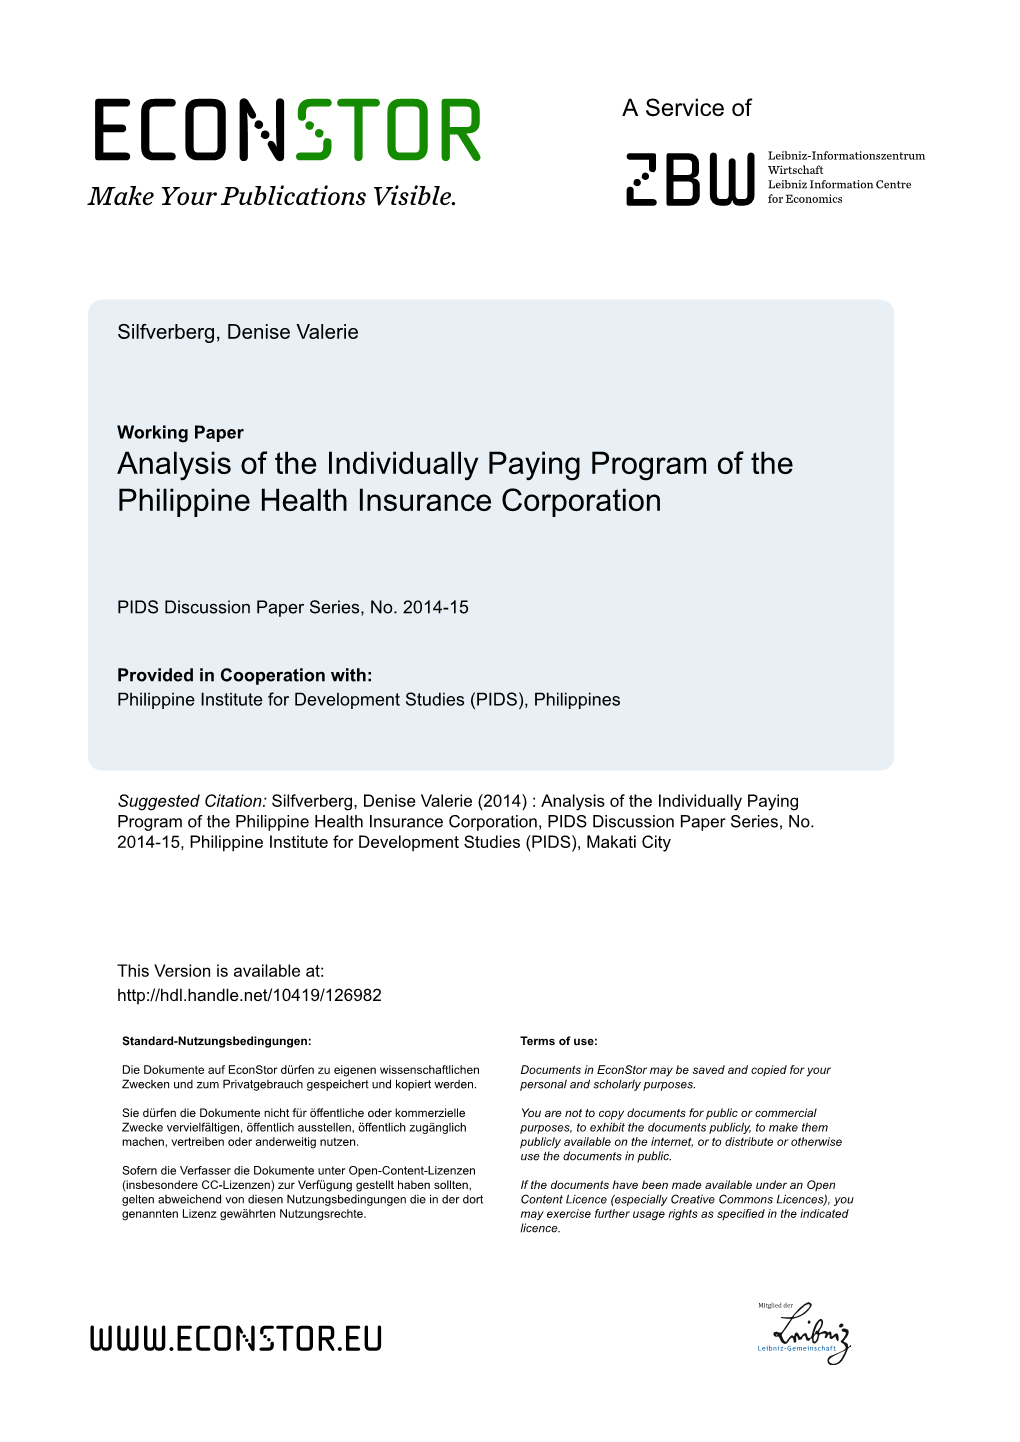 Analysis of the Individually Paying Program of the Philippine Health Insurance Corporation